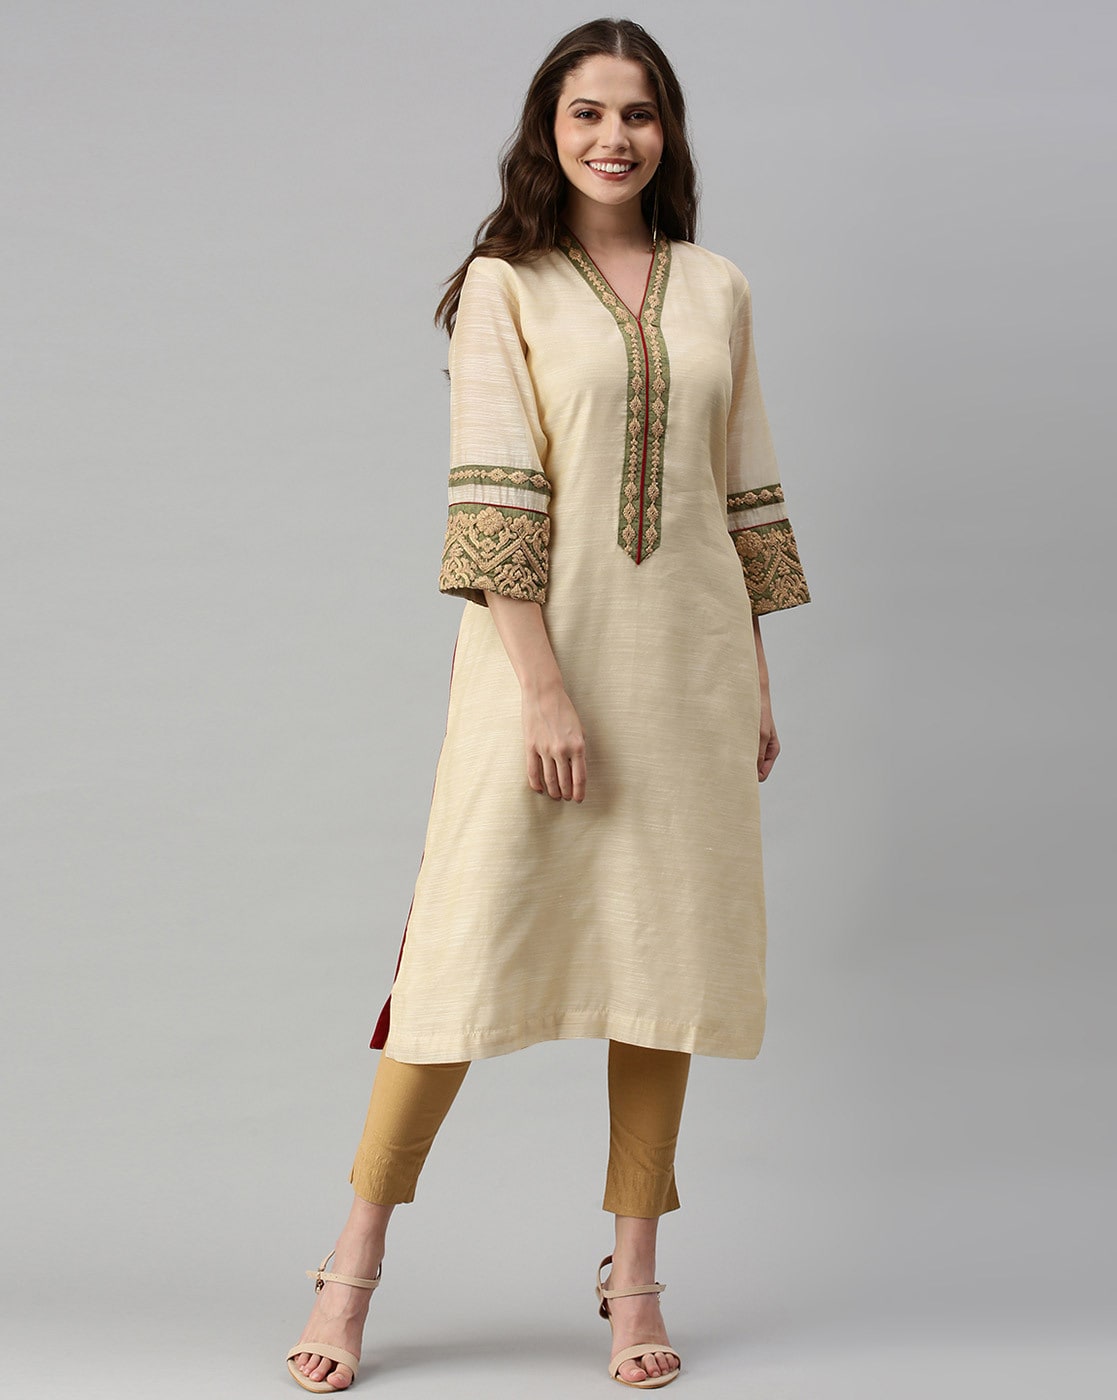 SOCH ANNOUNCES ITS RED DOT SALE ~Soch's collection now available upto 50%  off~ - Core Sector Communique | Fashion dresses, Traditional fashion,  Fashion